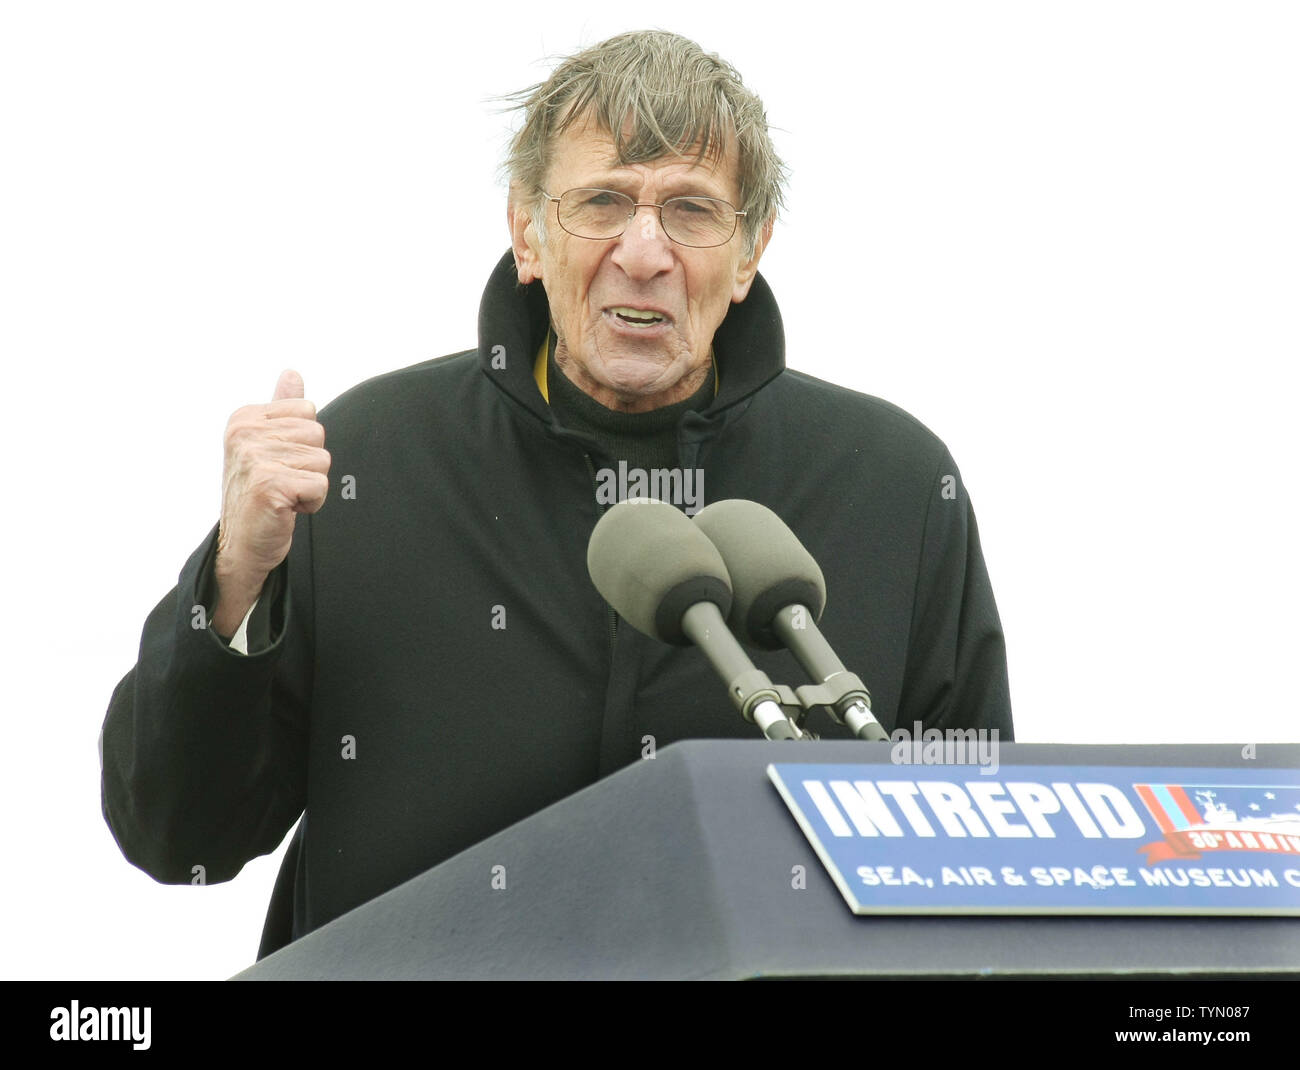 Leonard Nimoy, who played the character Mr. Spock in the TV series 'Star Trek,' speaks at a ceremony following the landing of the Space Shuttle Enterprise at John F. Kennedy International Airport on April 27, 2012 in New York City. Enterprise is part of NASA's retired space shuttle program and will be permanently displayed at the Intrepid Sea, Air & Space Museum starting in June.     UPI/ Monika Graff Stock Photo